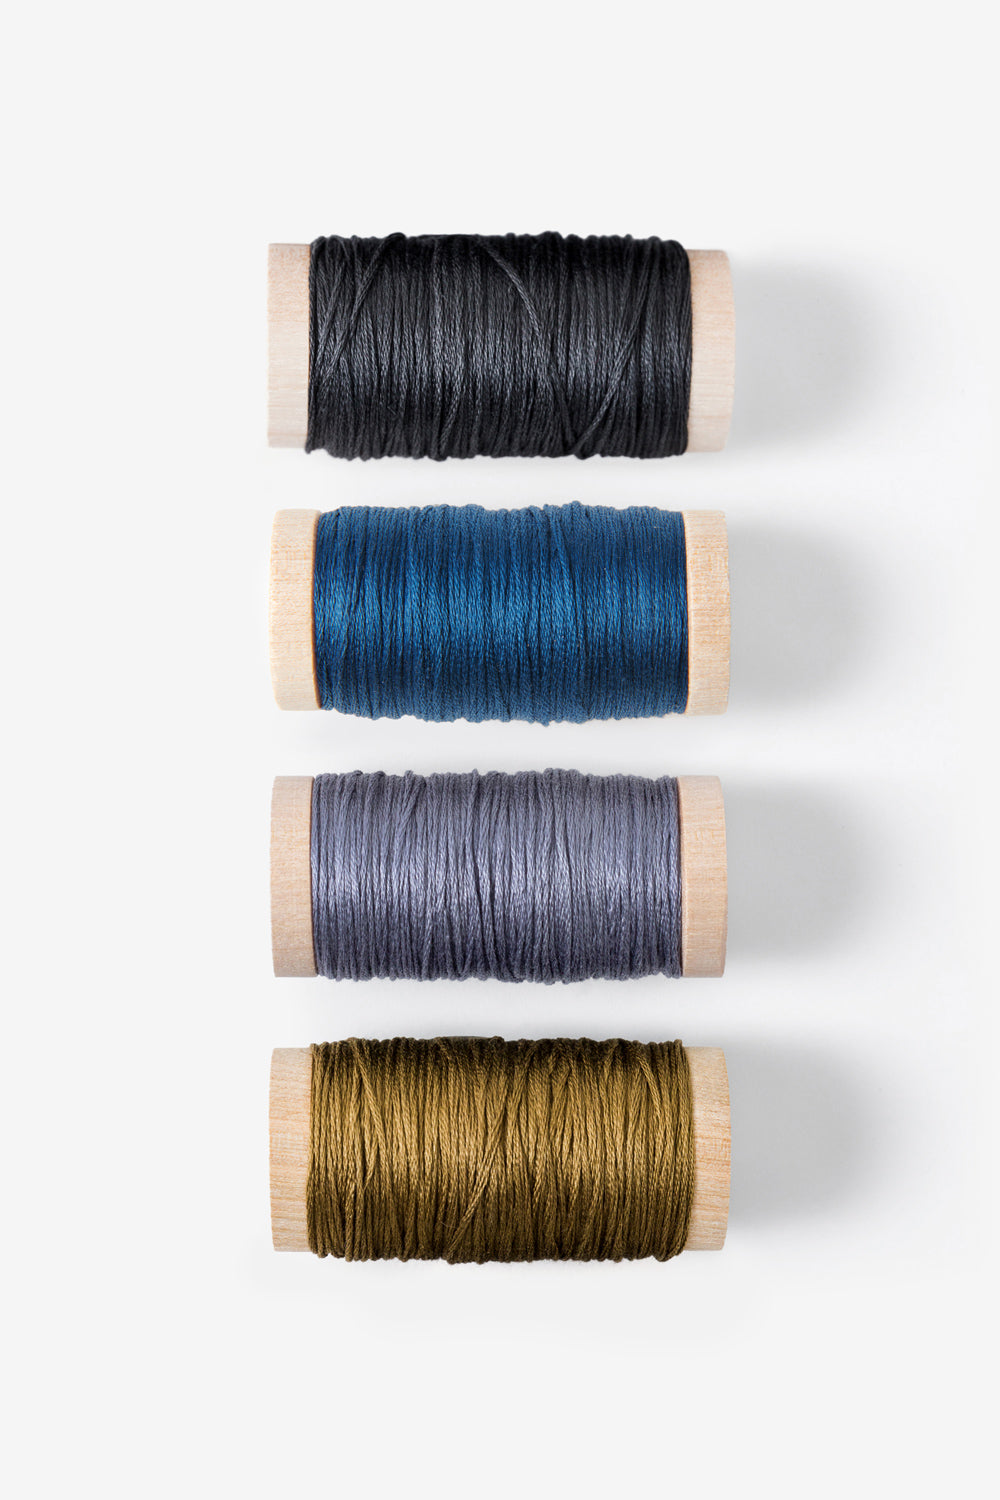 Embroidery Floss in Charcoal, Peacock, Slate, and Ochre.